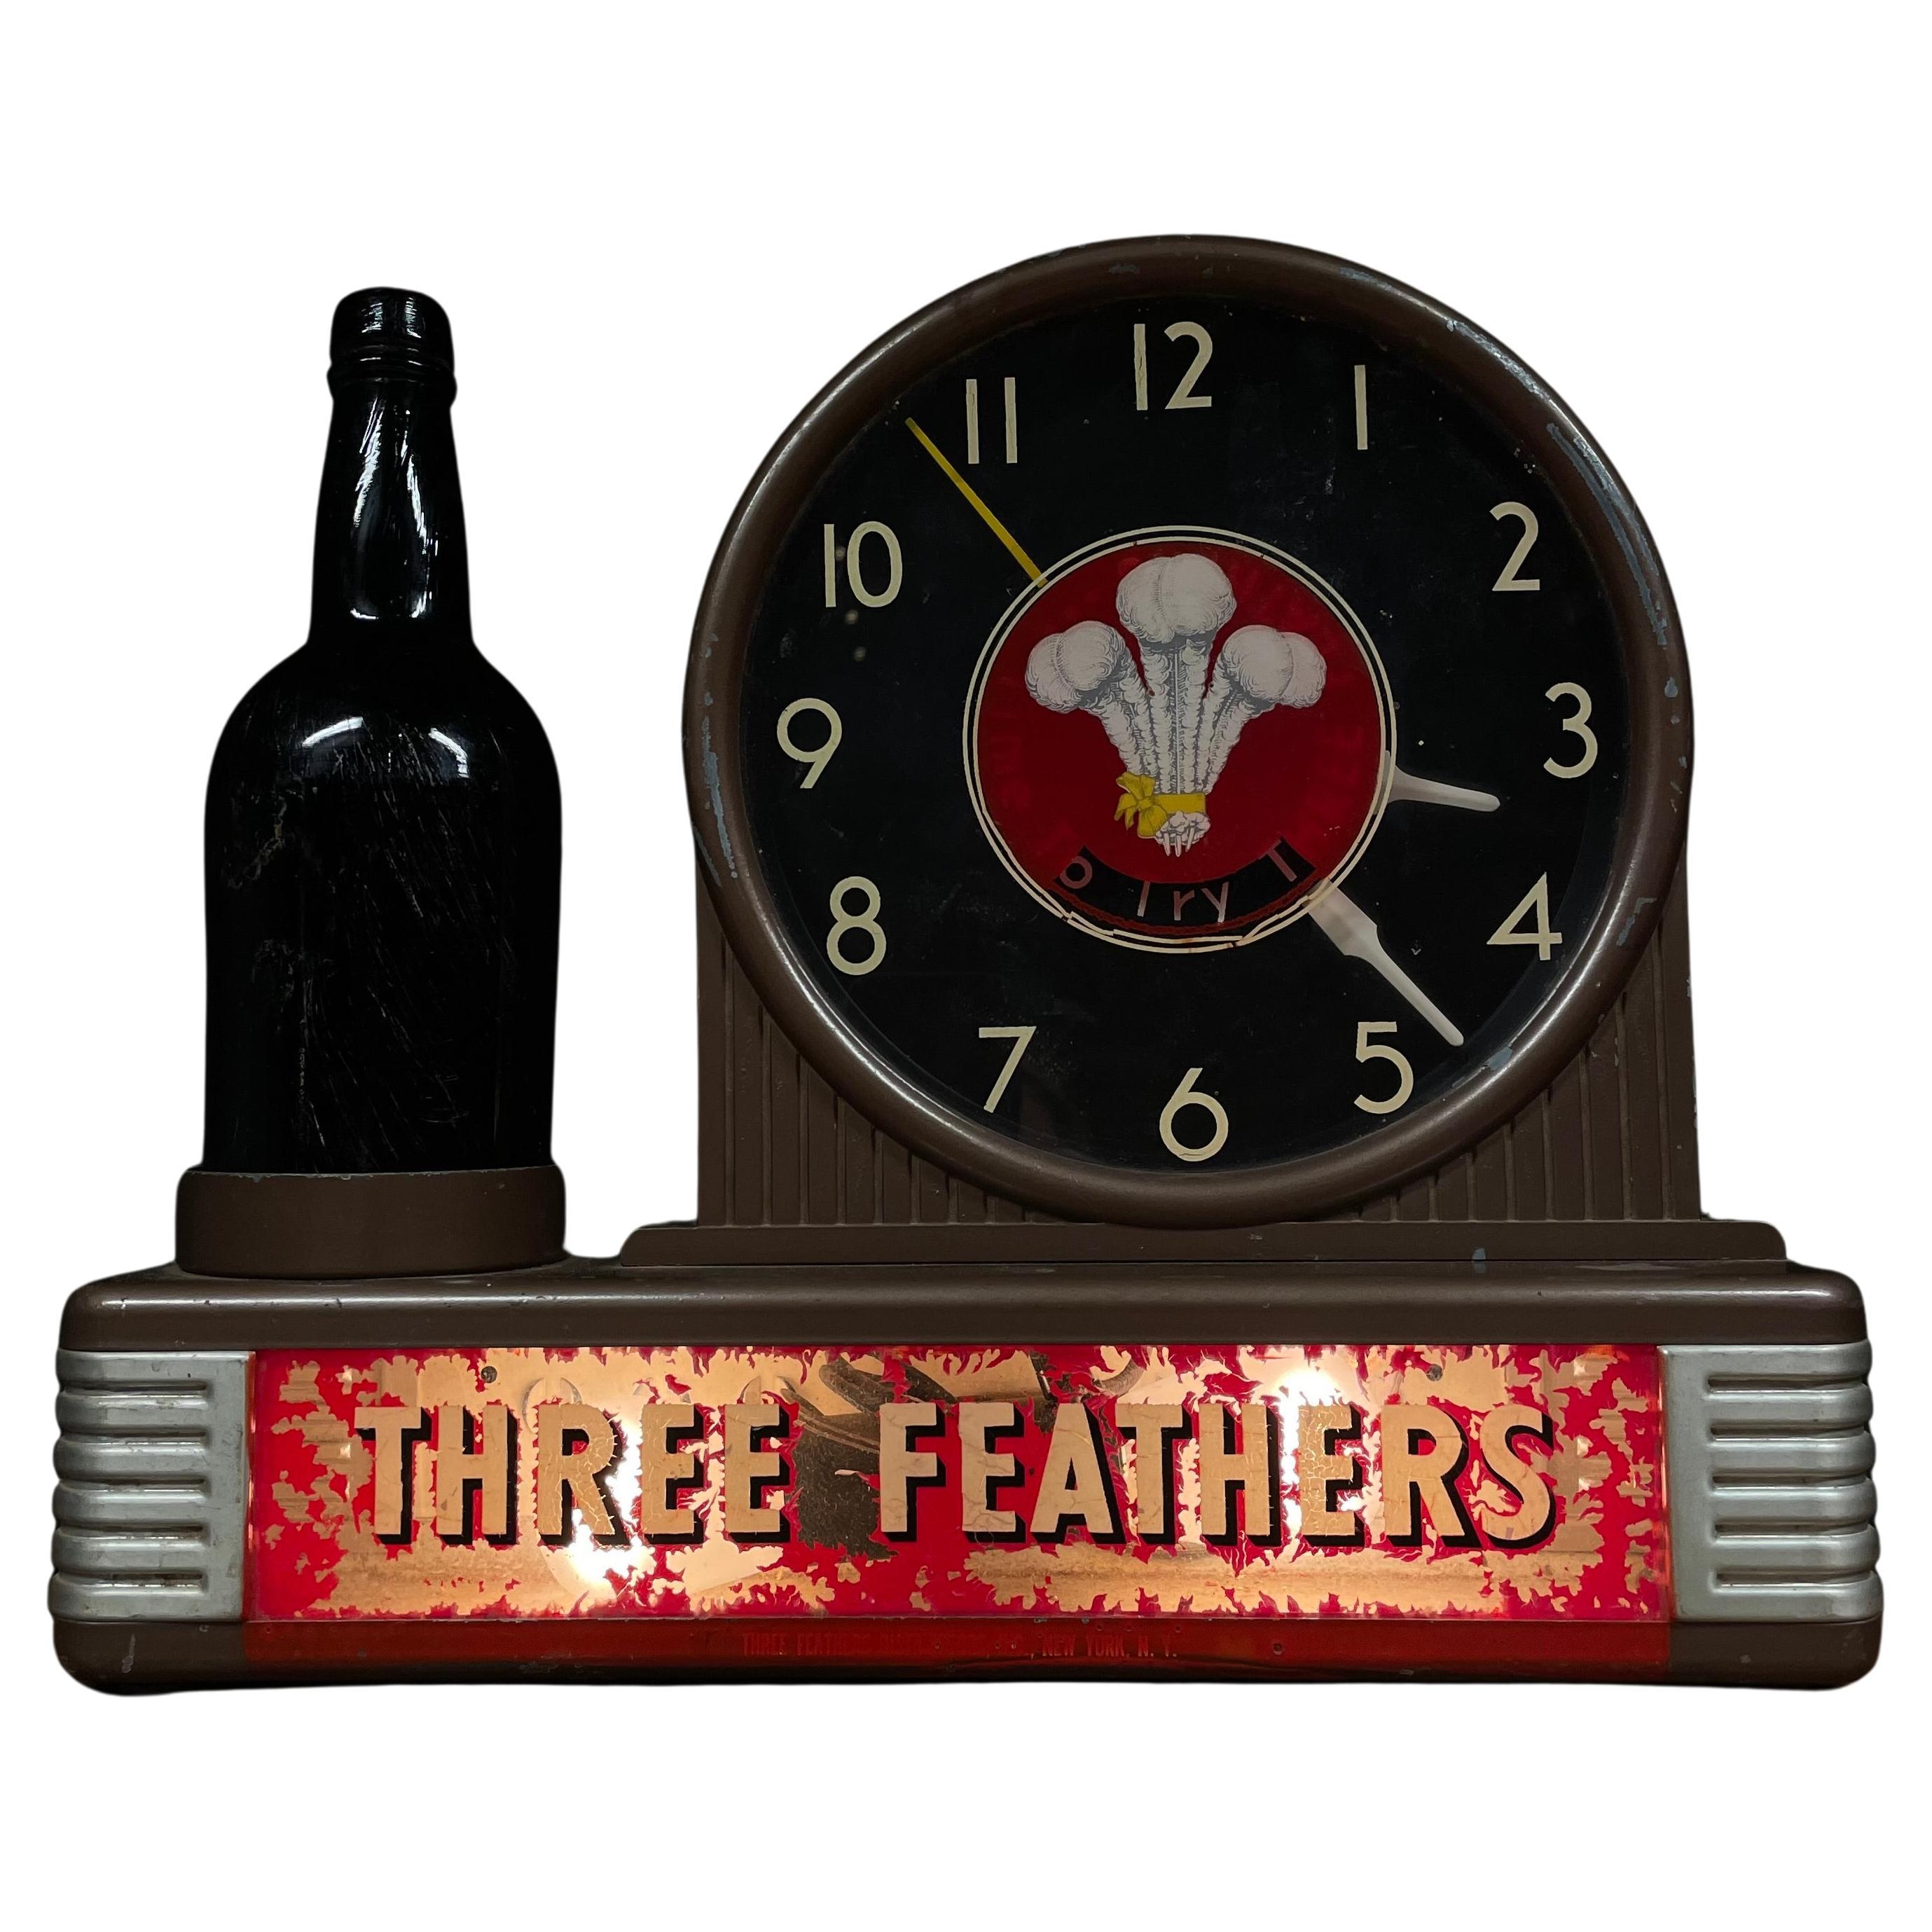 1960 light up three feathers whiskey sign by Schenley